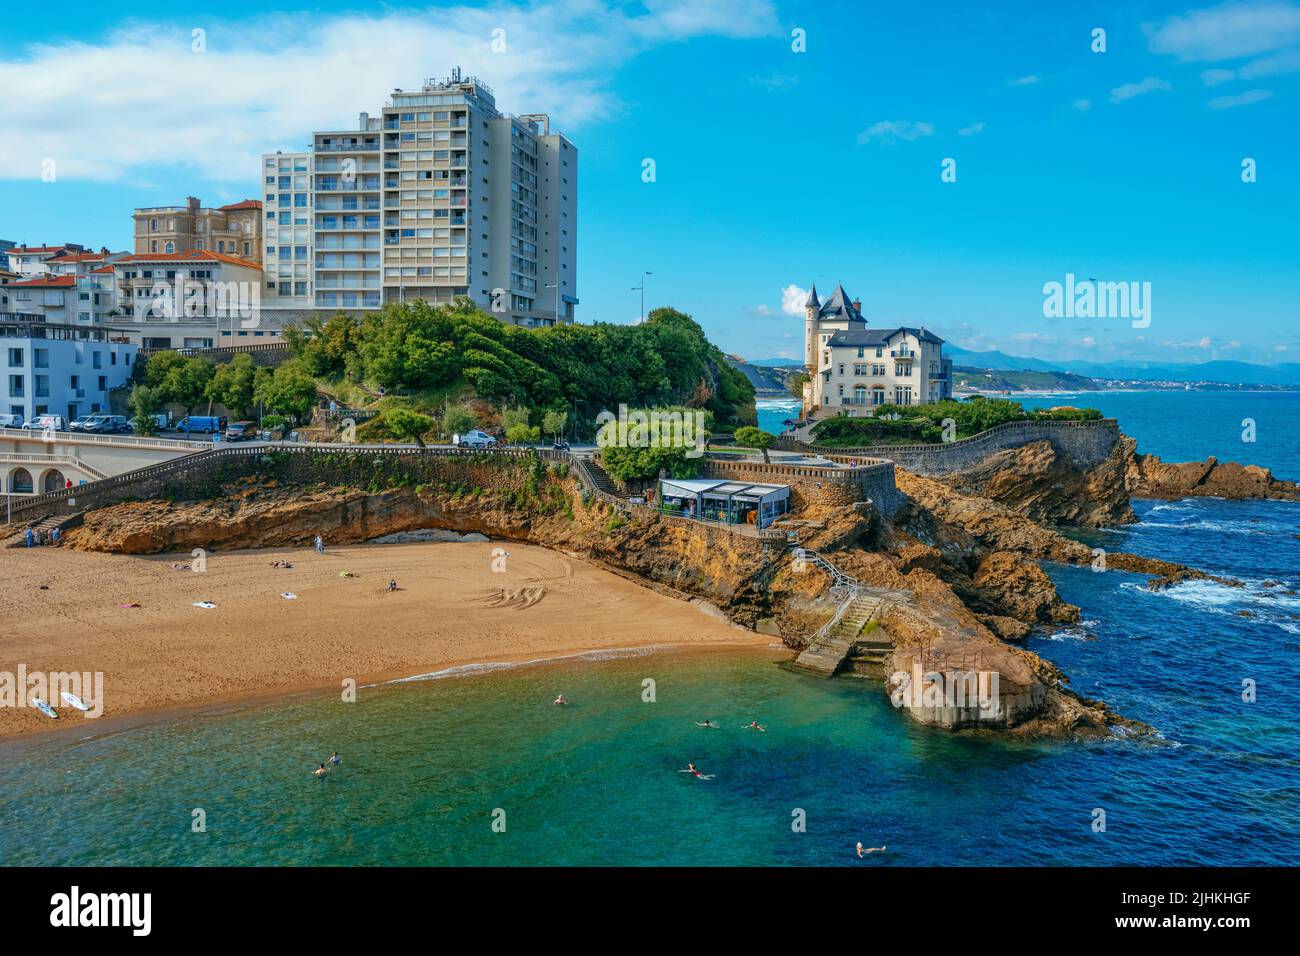 Biarritz, France - June 24, 2022: The Plage du Port Vieux beach in Biarritz, France, with some people enjoying the beach early in the morning in a sum Stock Photo